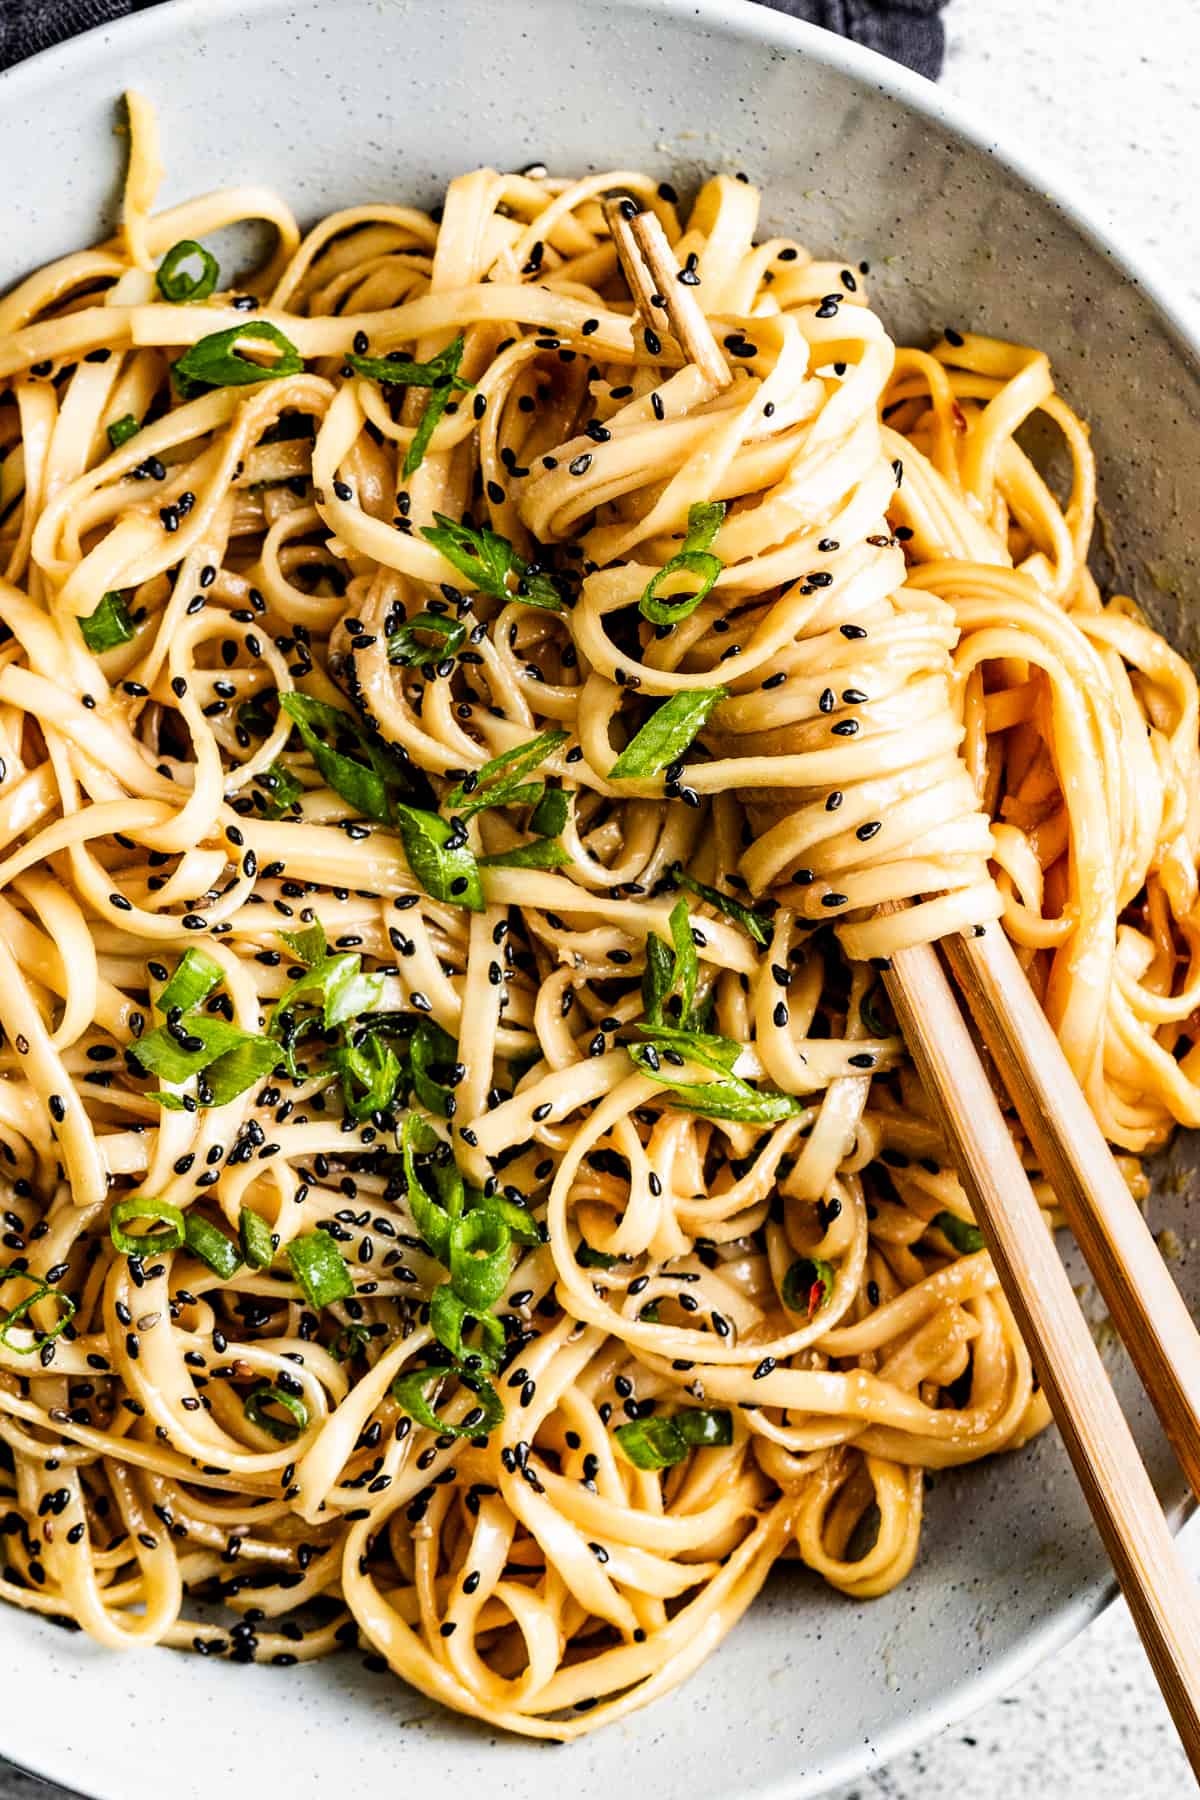 Teriyaki noodles in a bowl sprinkled with green onions and sesame seeds.